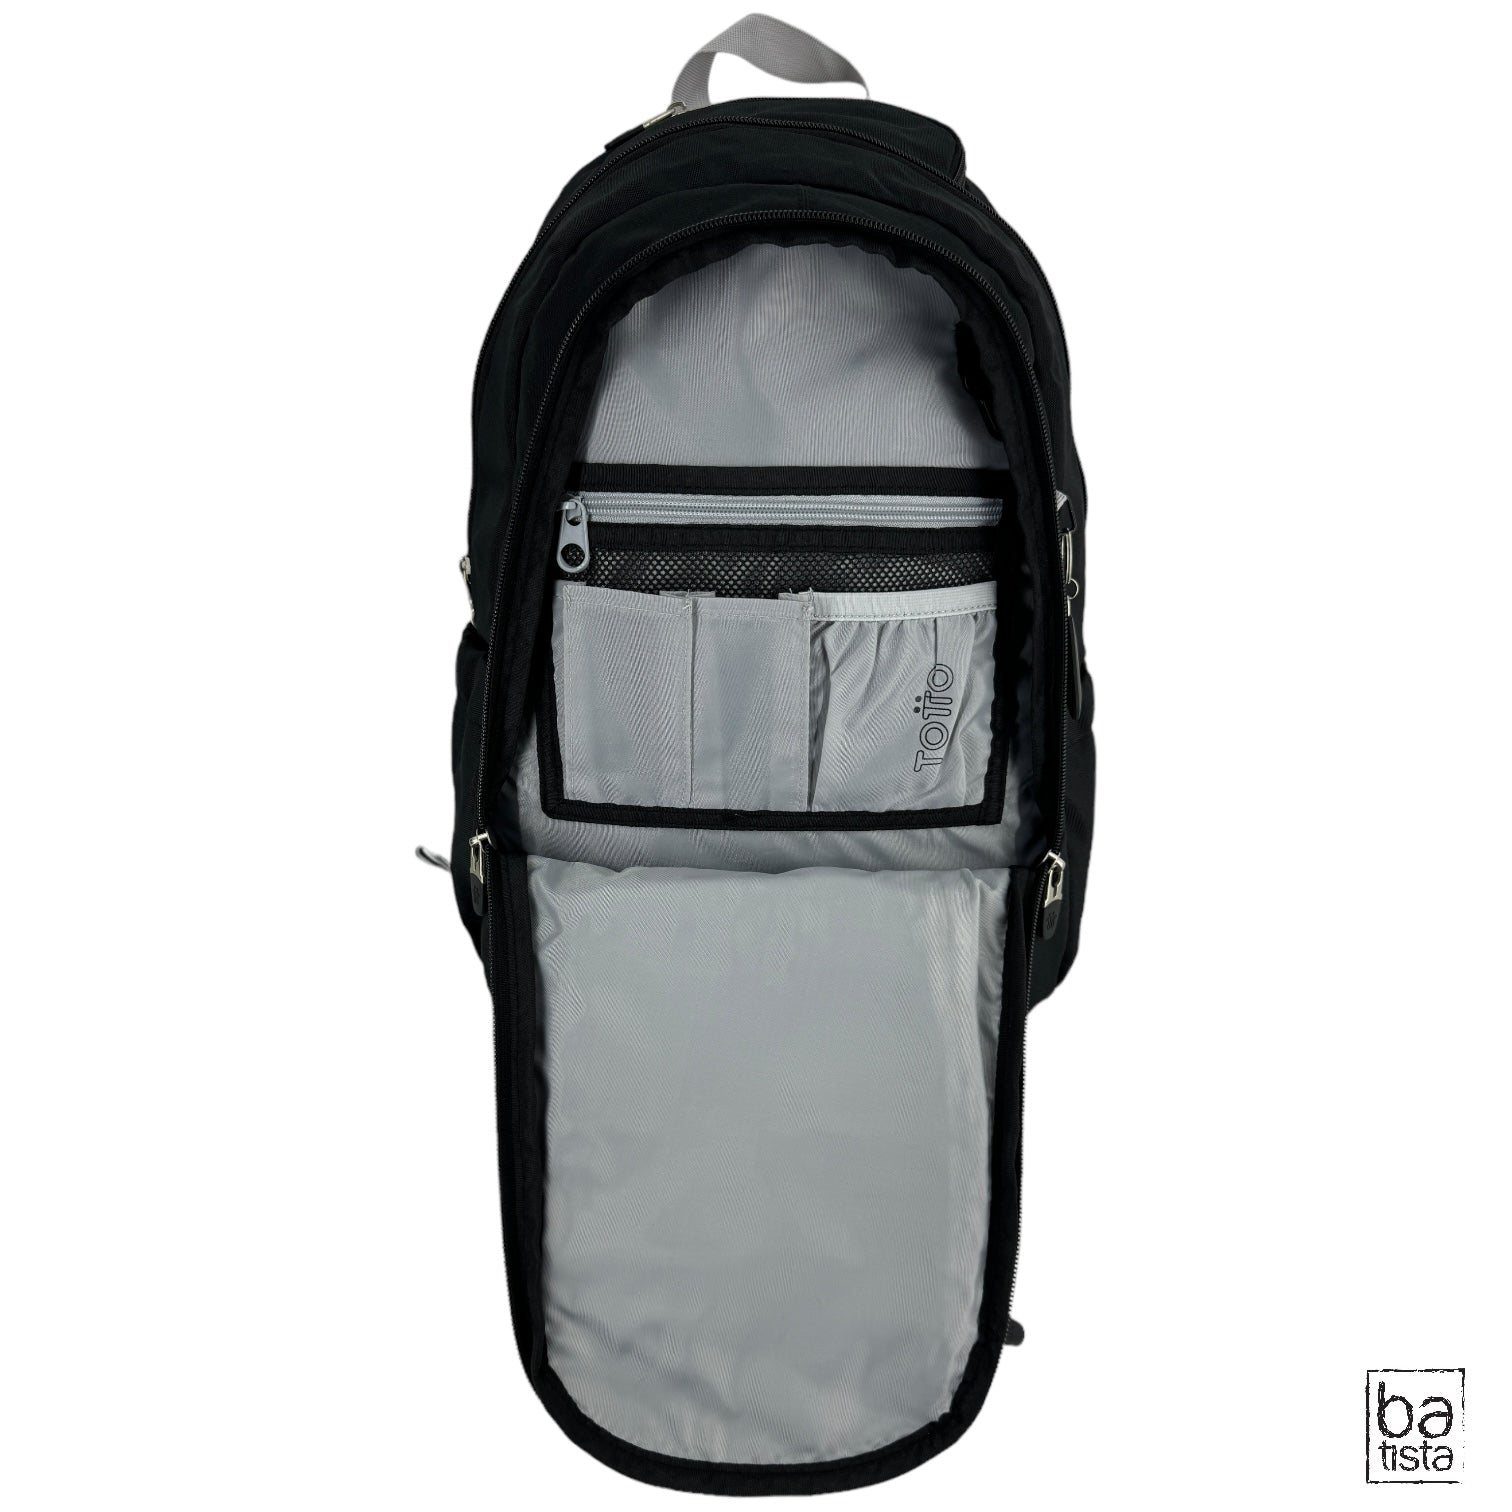 Morral Totto Goctal 2.0 N01 Negro